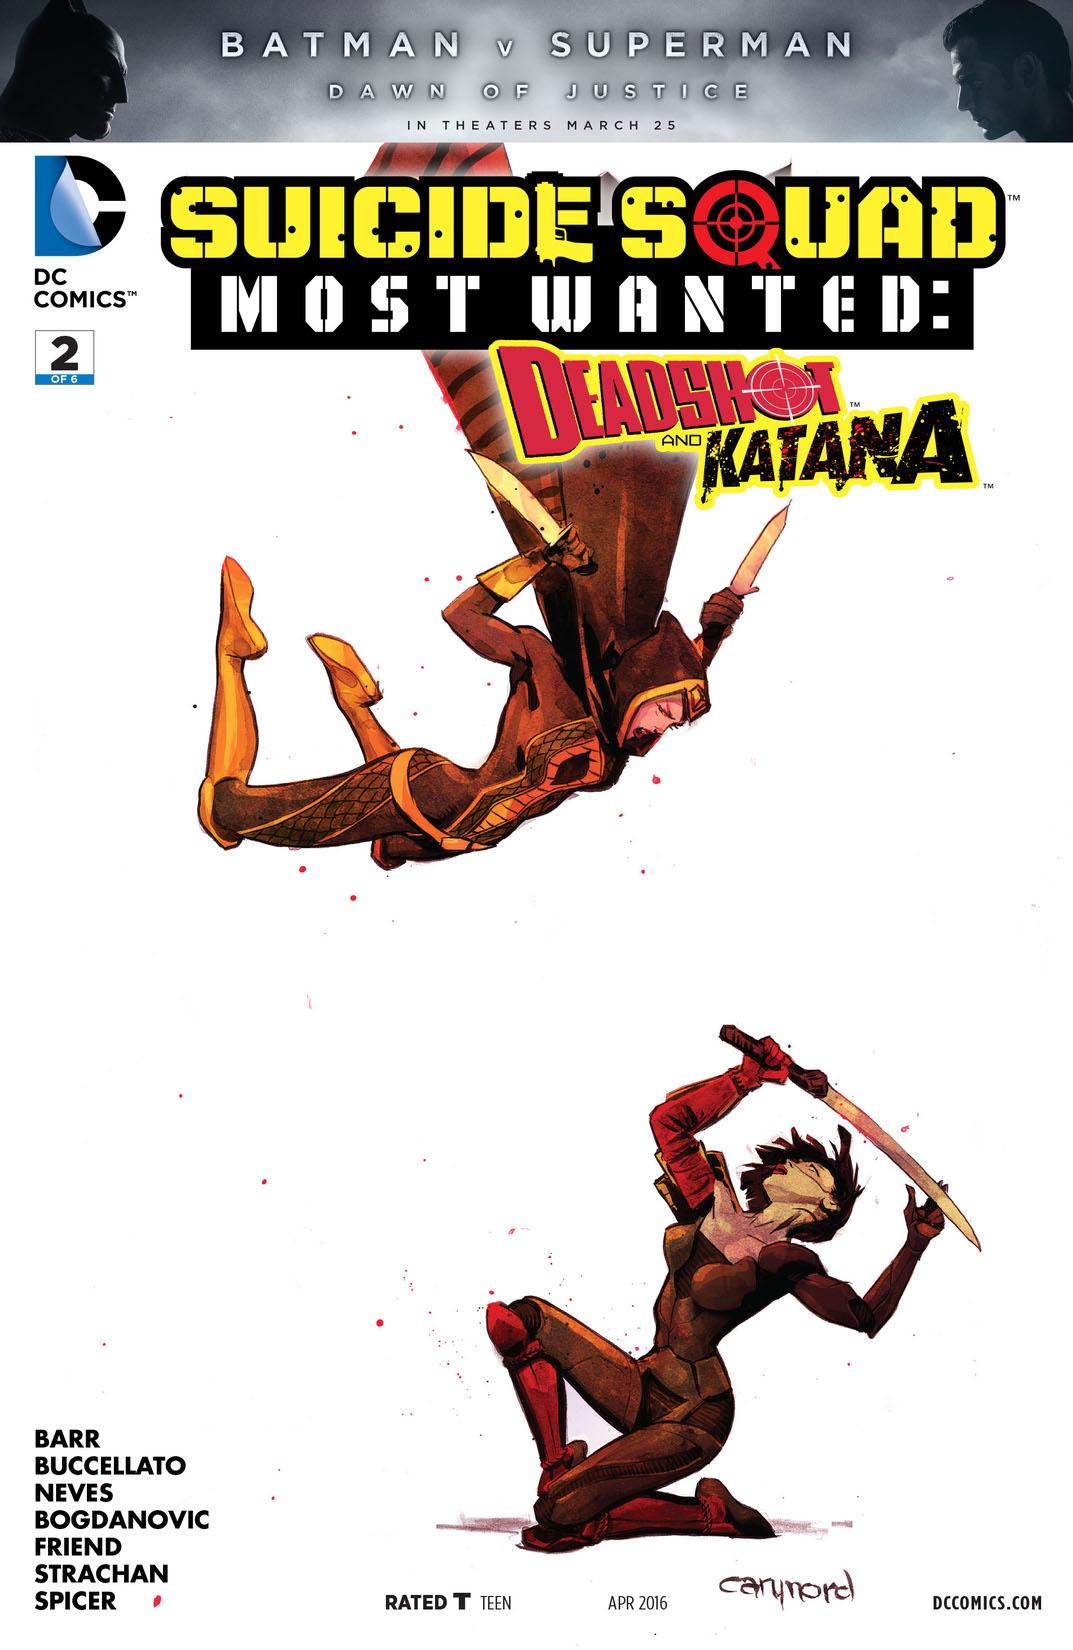 Suicide Squad Most Wanted: Deadshot and Katana #2 preview images